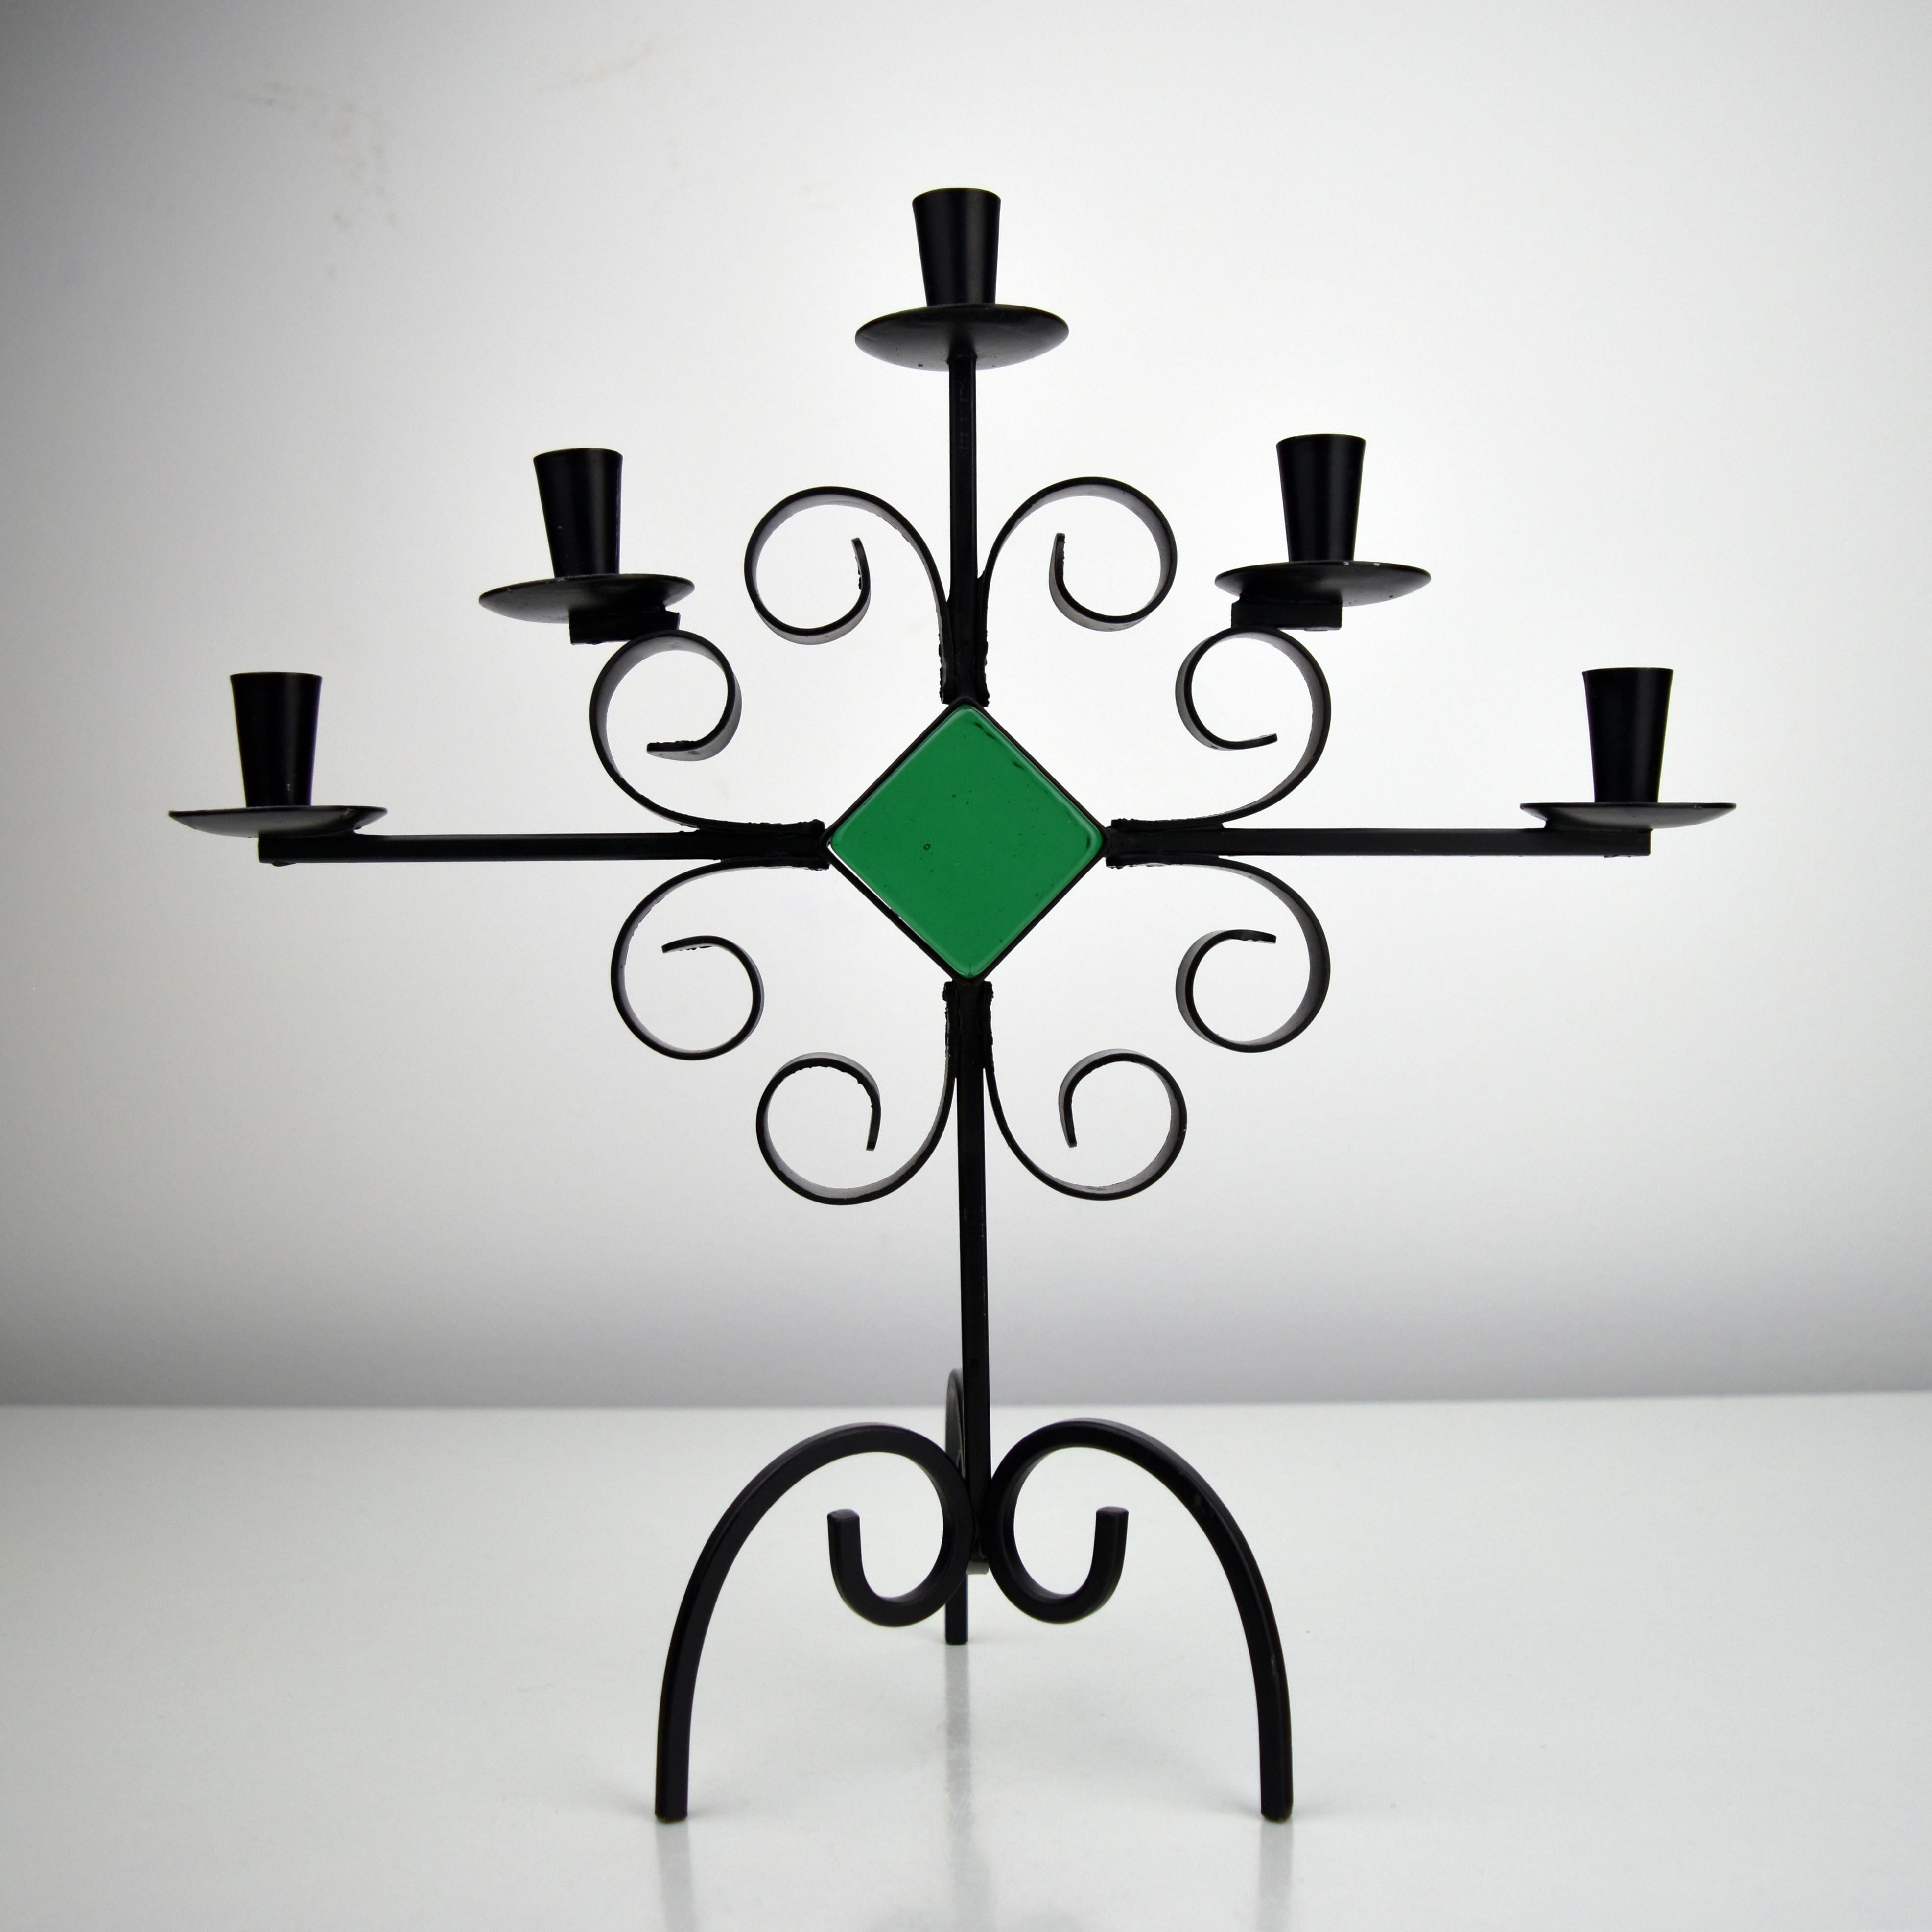 A beautiful wrought iron candelabra, designed by Gunnar Ander for the Swedish manufacturer Ystad Metall in the 1960s.